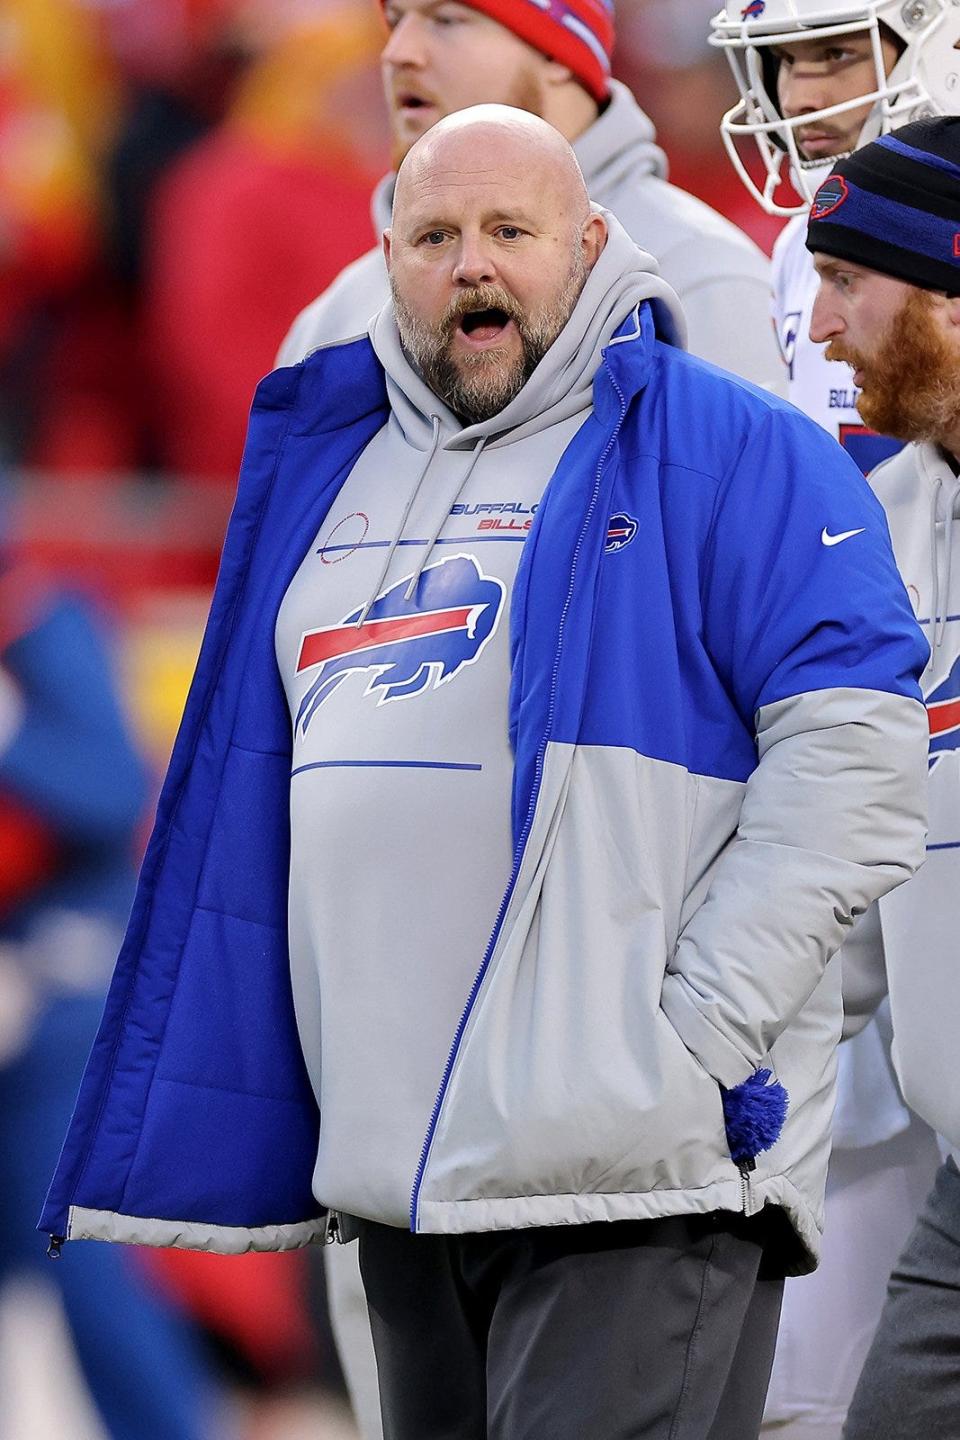 Bills offensive coordinator Brian Daboll, shown prior to last Sunday's AFC playoff game against the Chiefs, had appeared to be the favorite to become the Dolphins' next head coach but he's reportedly set to become the New York Giants' next head coach.